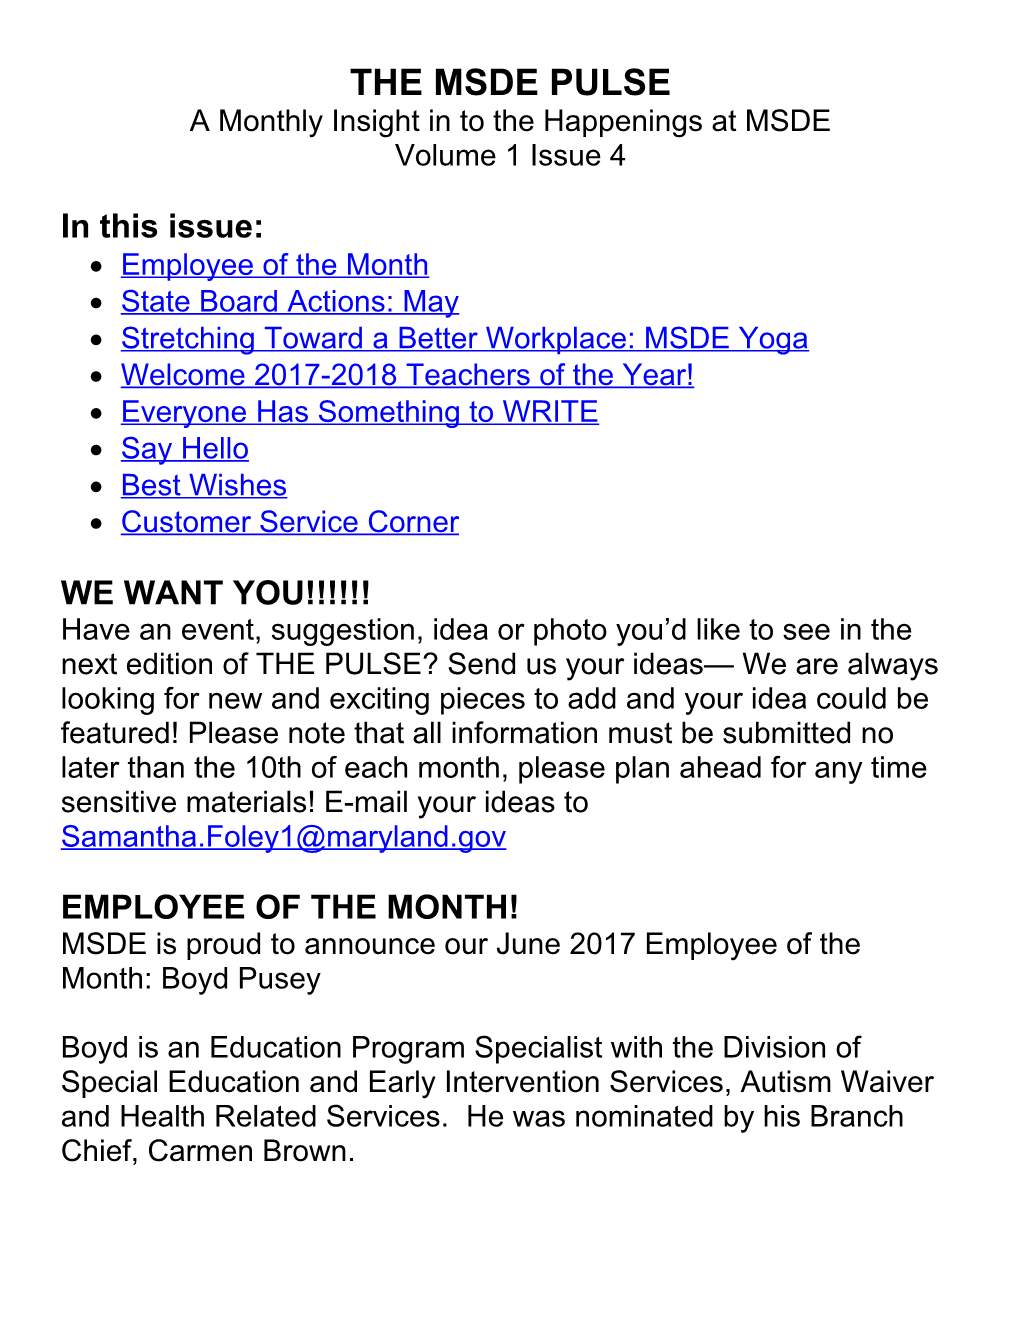 A Monthly Insight in Tothe Happenings at MSDE